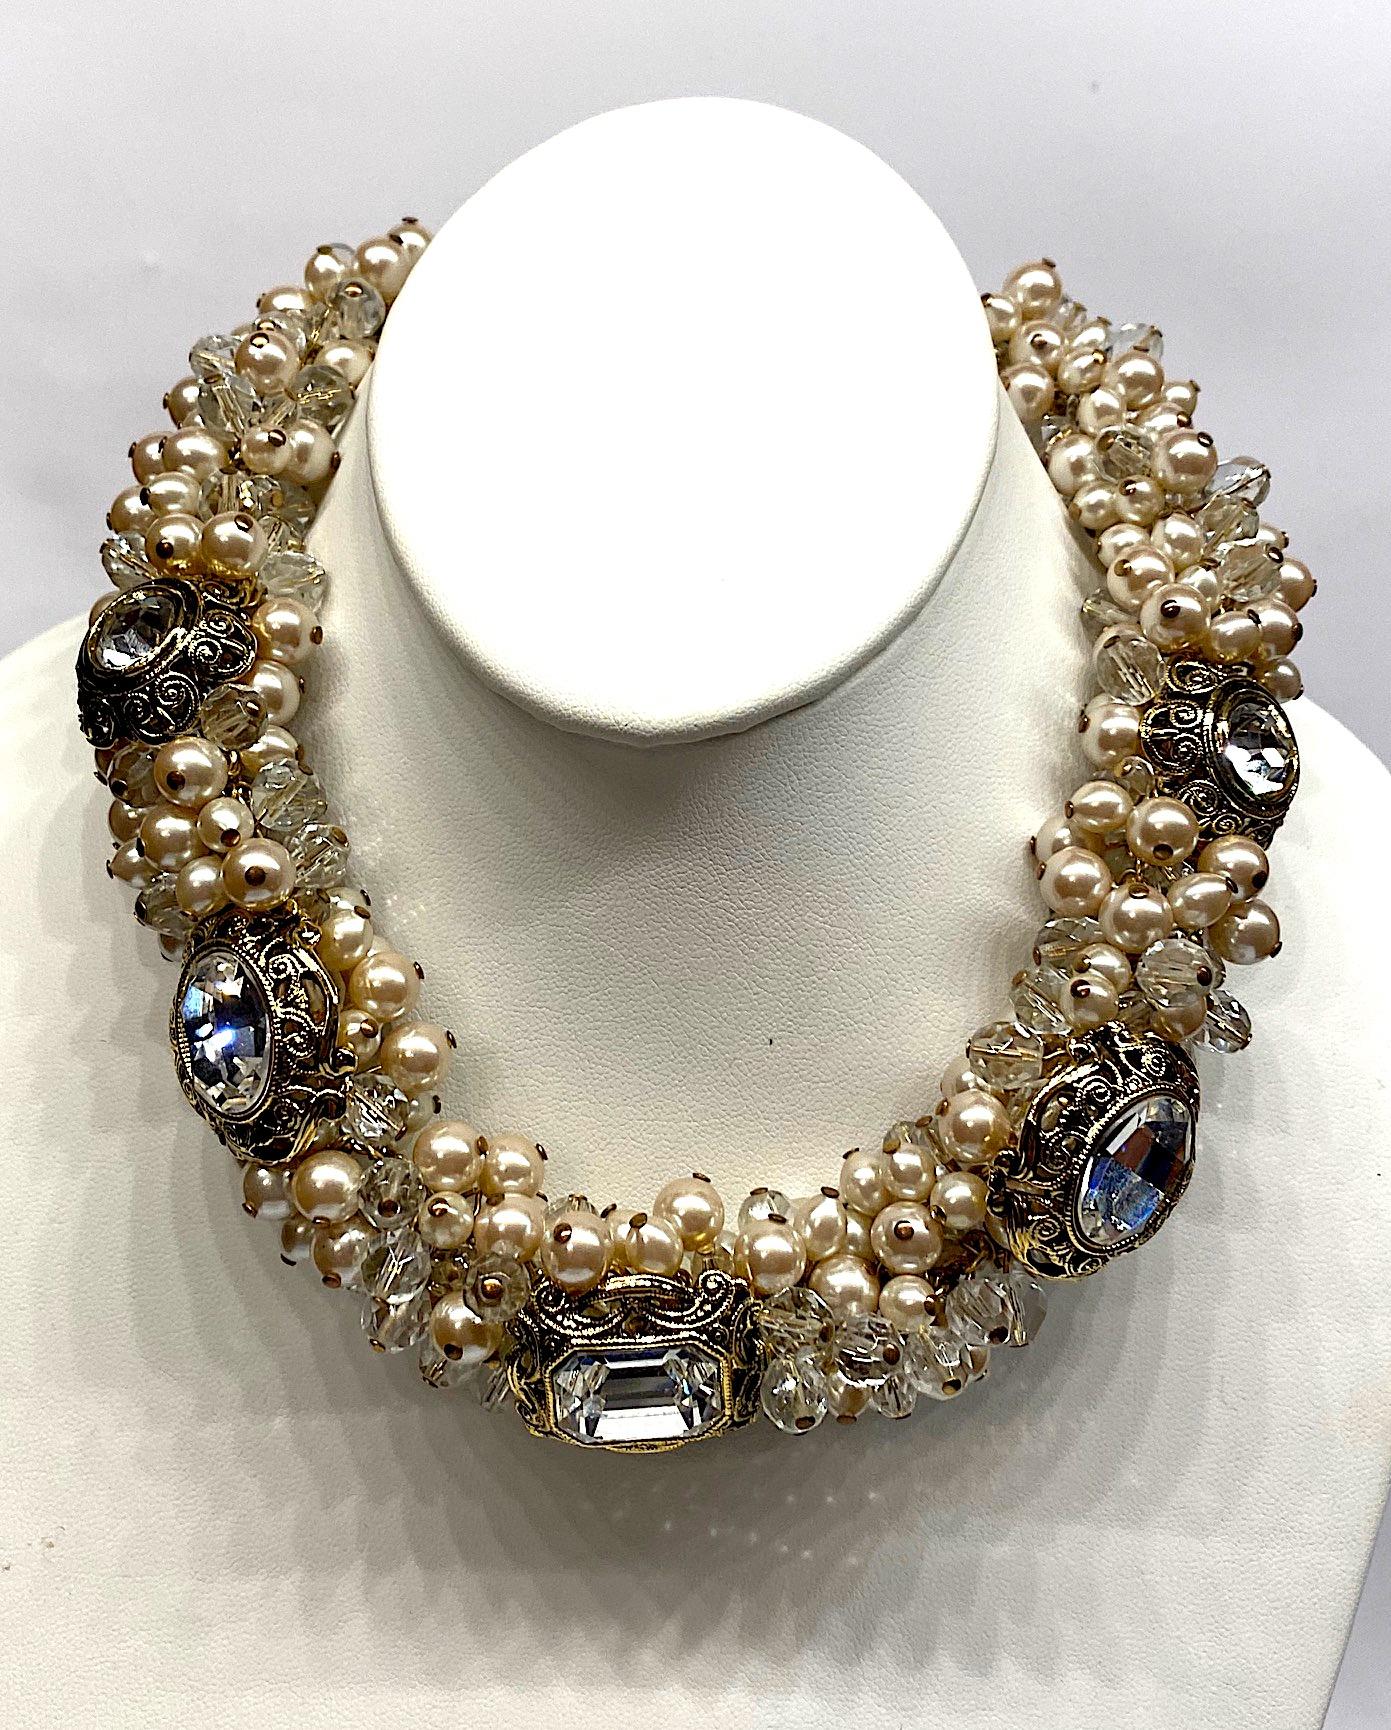 A dramatic necklace by Italian fashion jewelry company De Liguoro circa 1980. Champagne color faux pearls with large and small faceted crystal beads are individually attached to two gold tone chains in a cluster formation. Additionally, within the